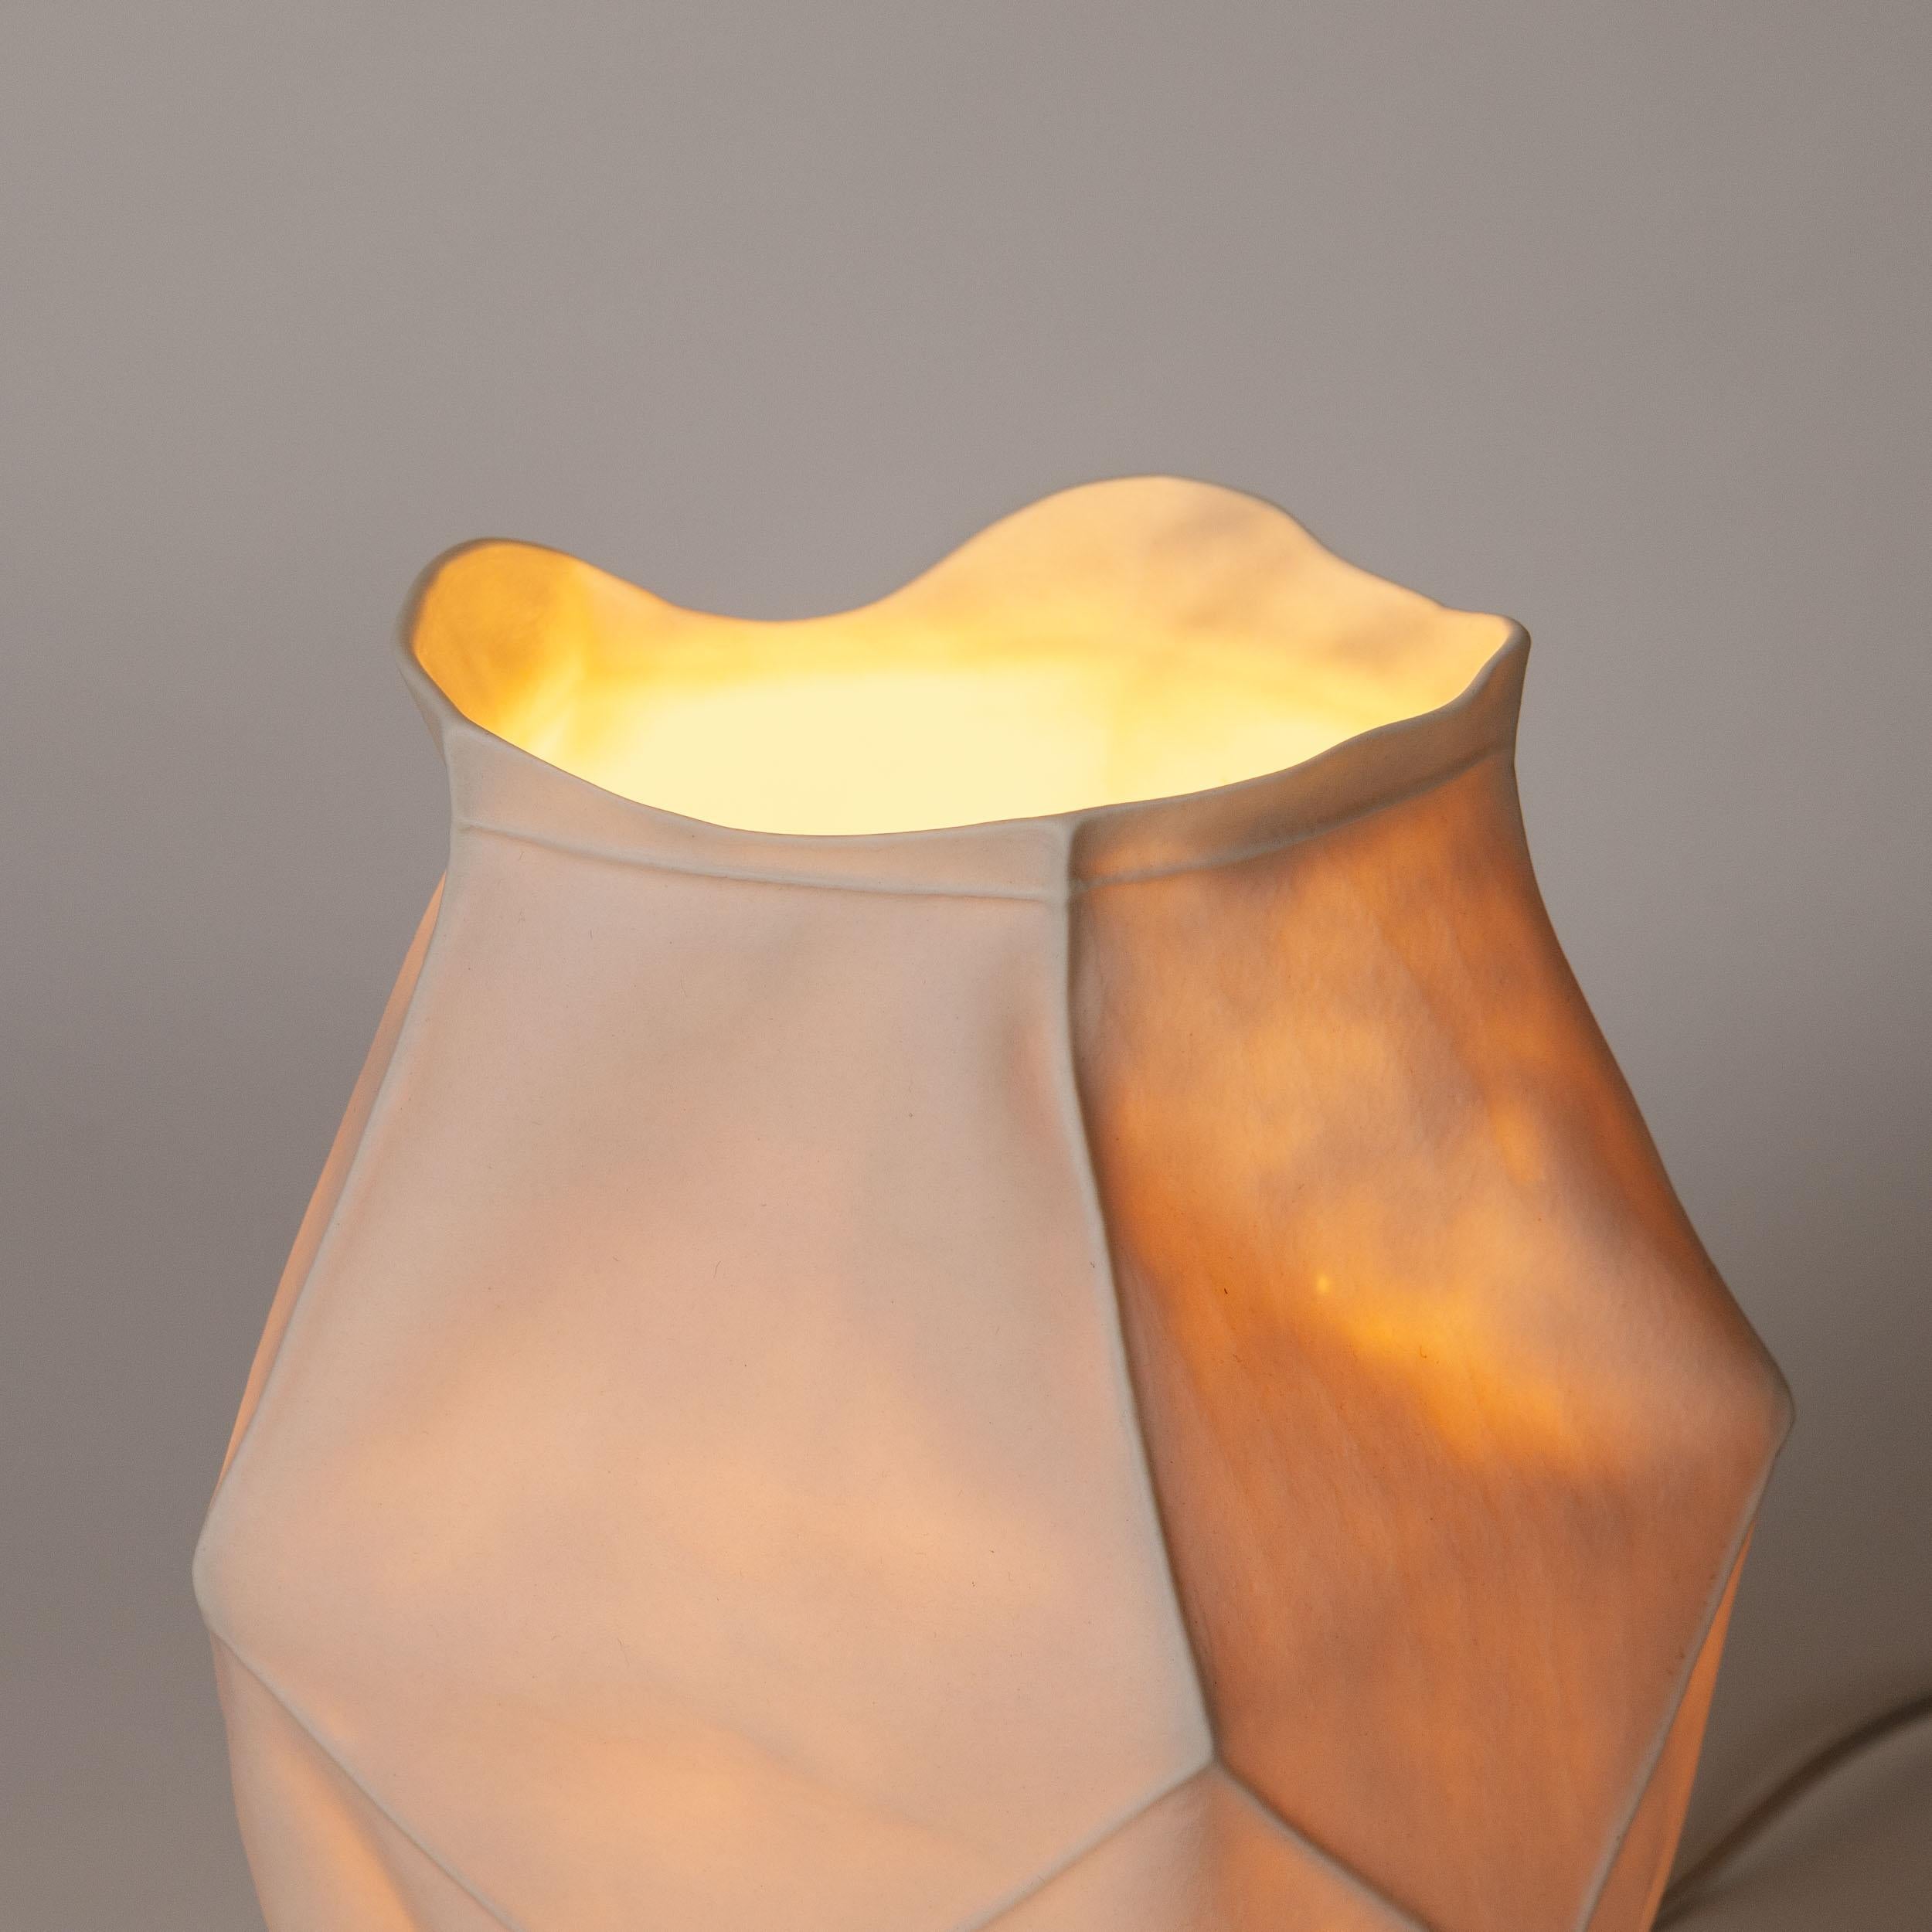 One of a kind Kawa Series Table Lamp by Luft Tanaka Studio

A white ceramic table lamp with a fabric-like organic form produced by casting liquid porcelain into a sewn leather mold. The translucent porcelain body results in the light to cast a warm